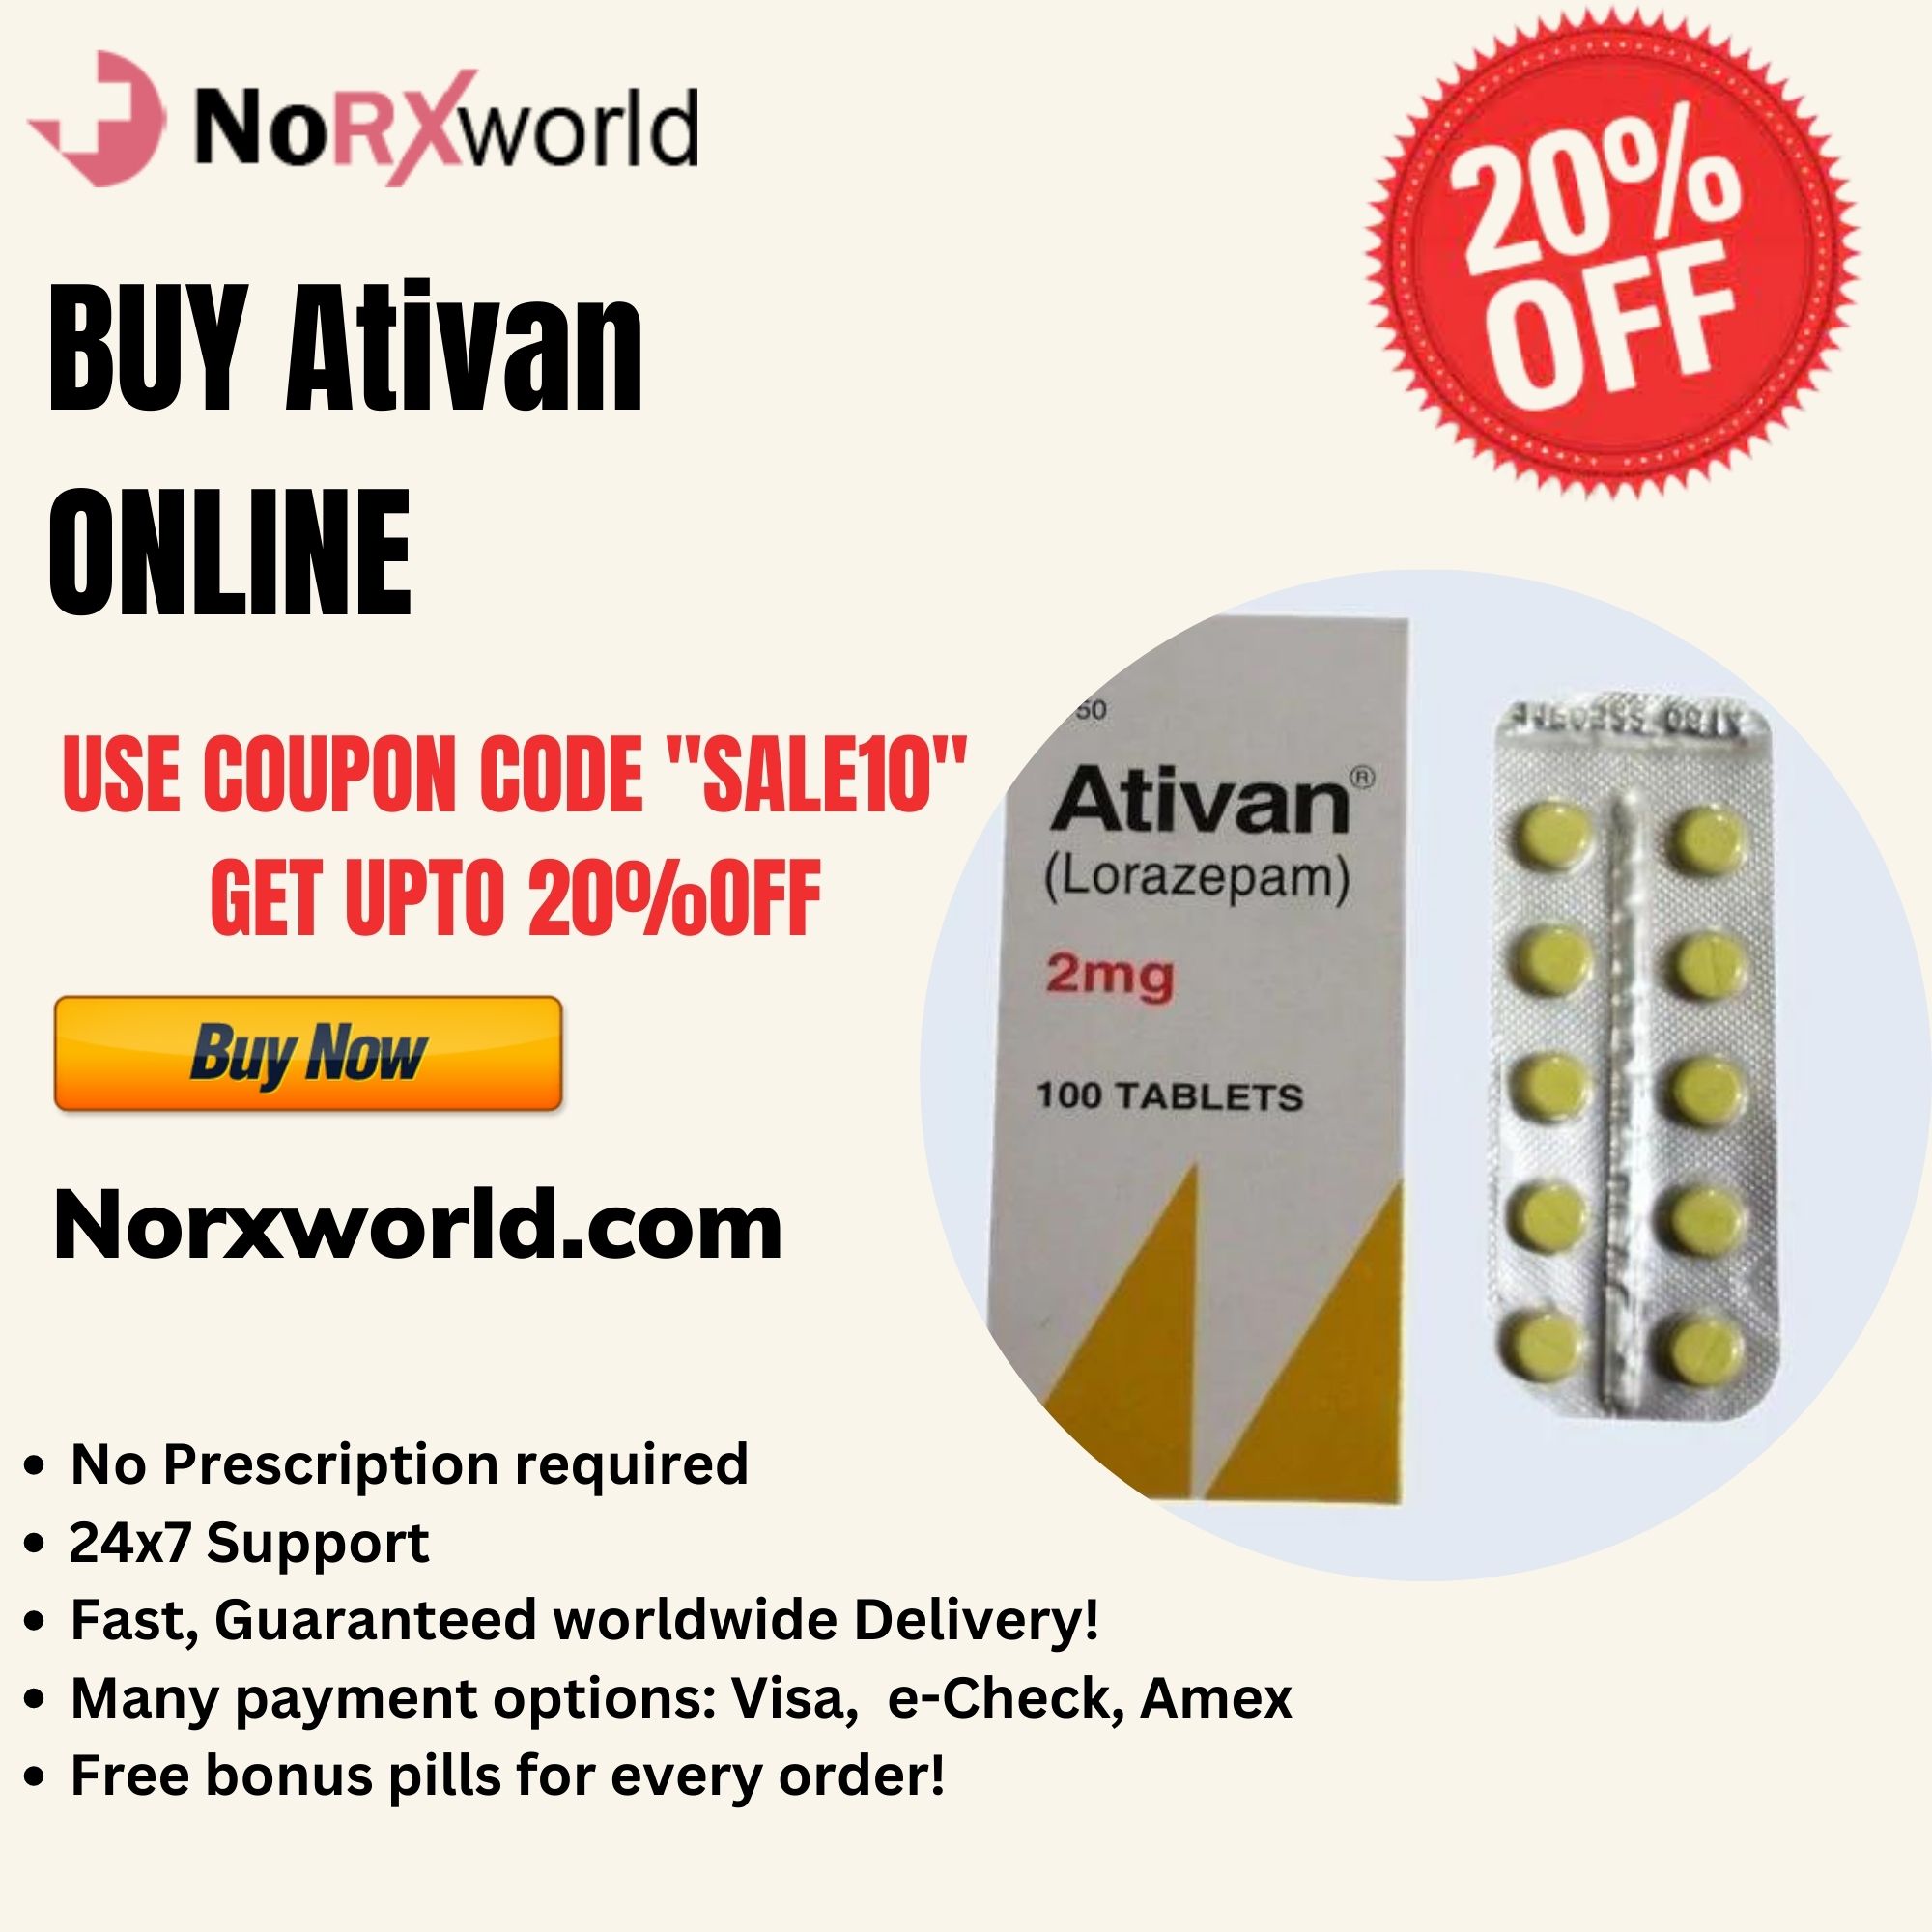 Order Ativan Online Legally In The USA